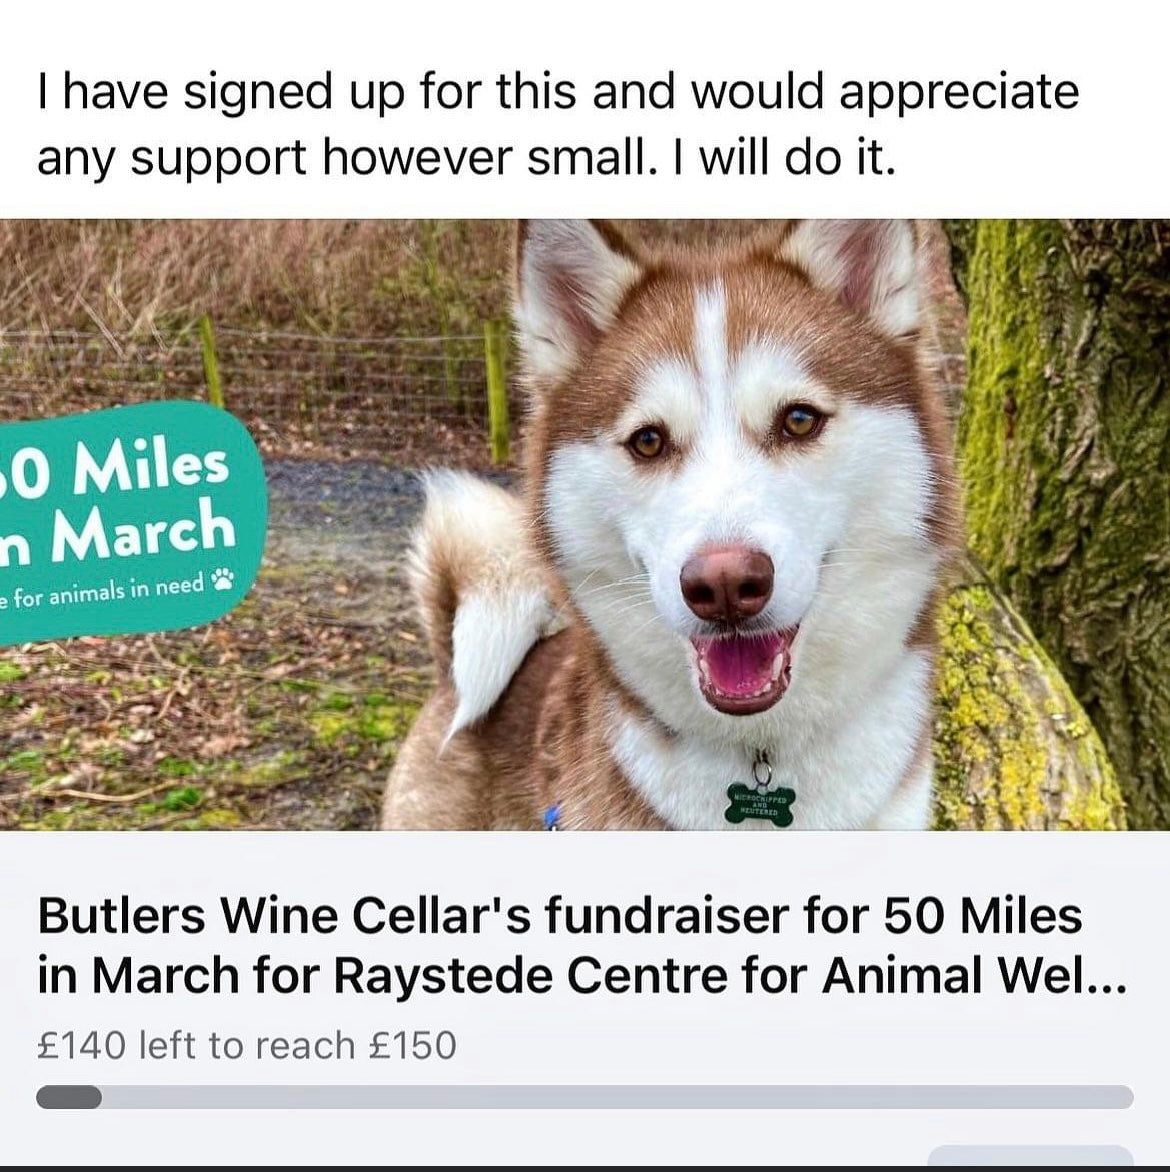 50 miles in March for Raystede Centre for animal welfare